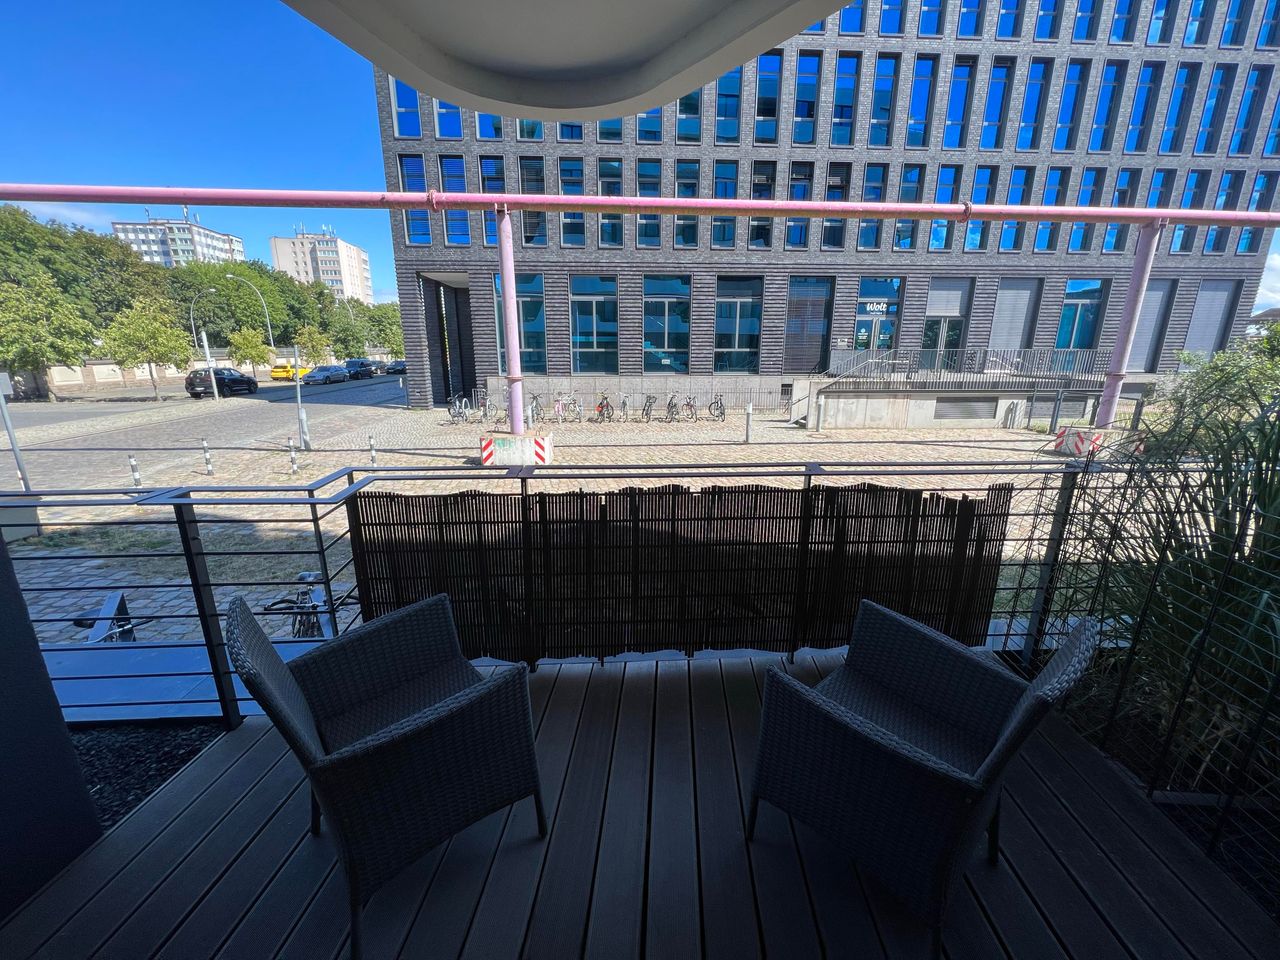 Premium Apartment with view on Spree river in Hot Spot